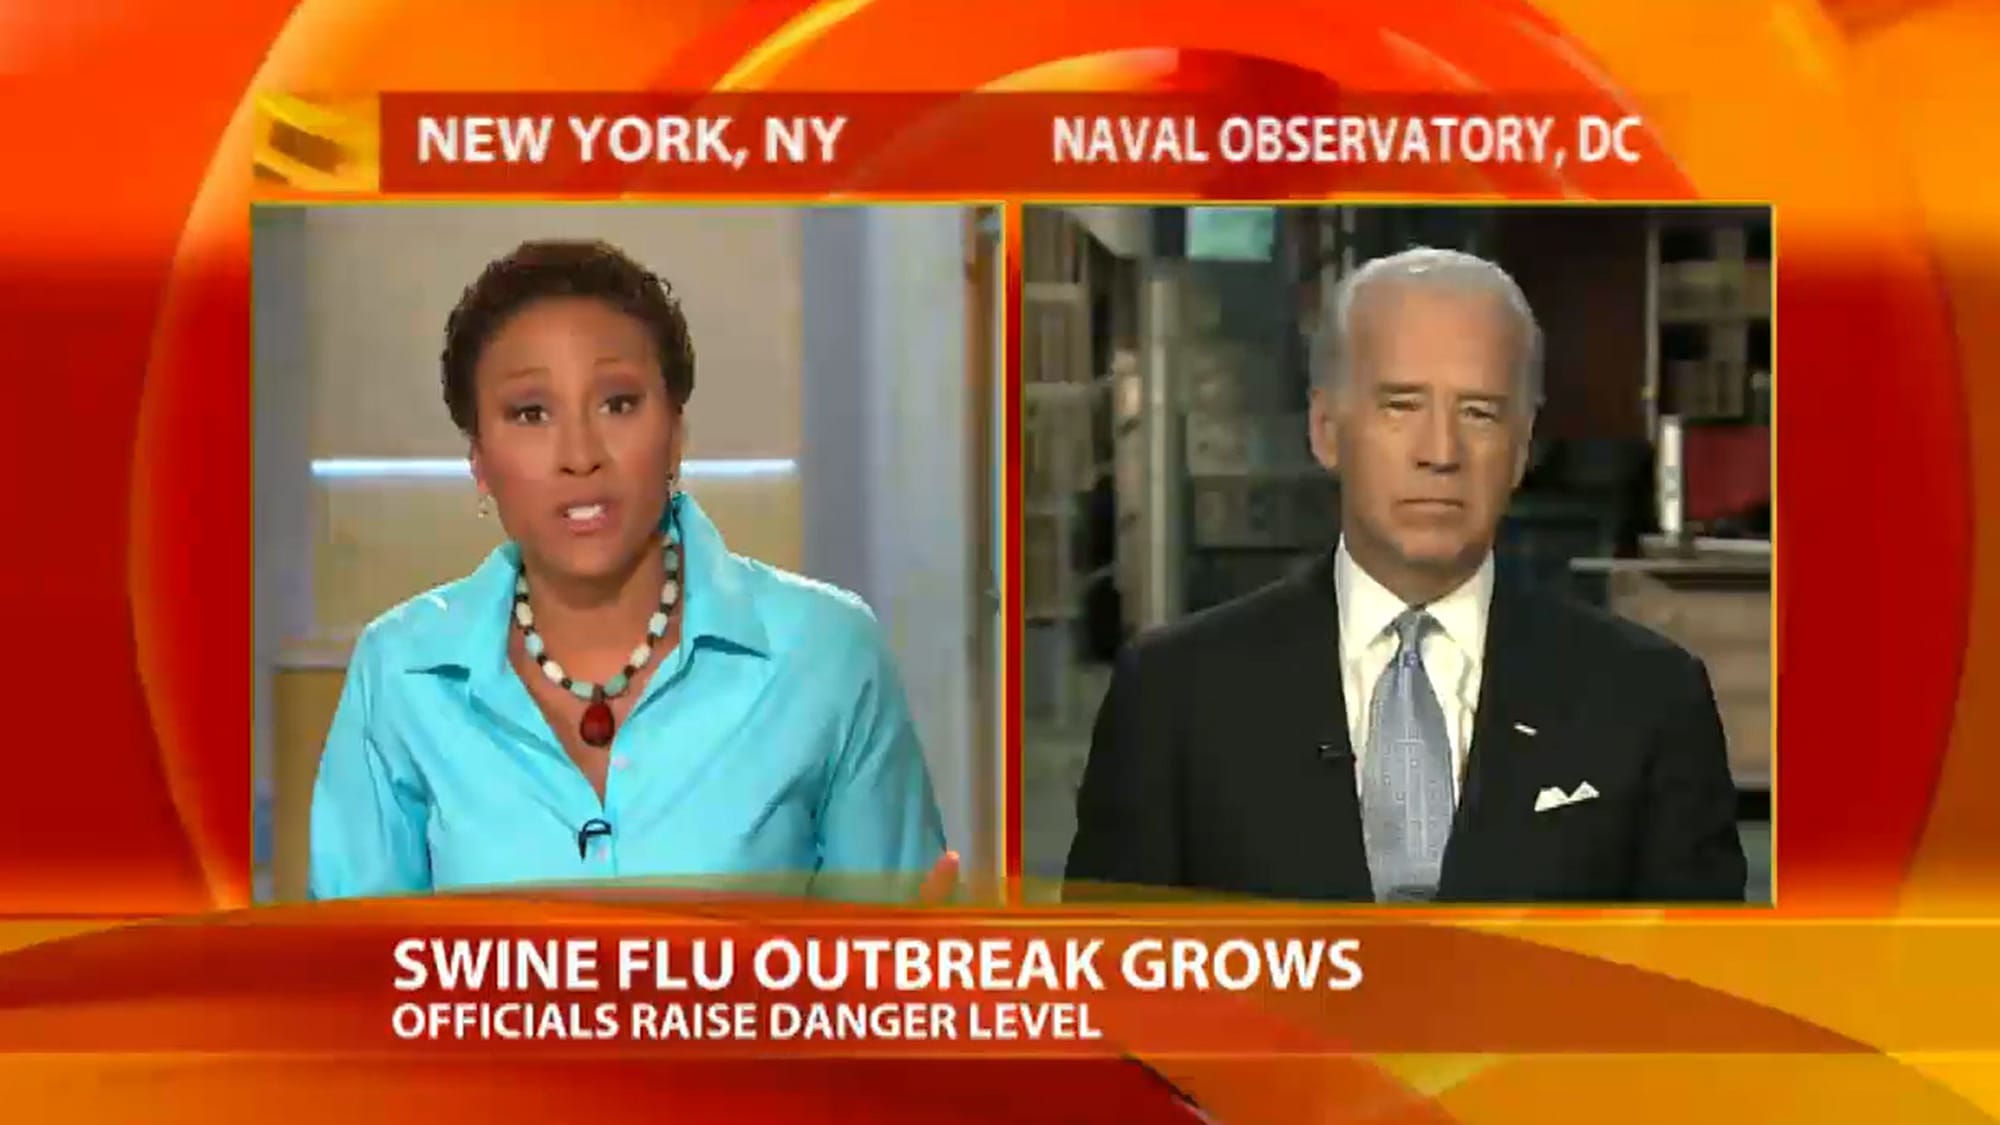 Detail from 2009 news clip of Vice President Joe Biden reporting on government guidance on H1N1 flu